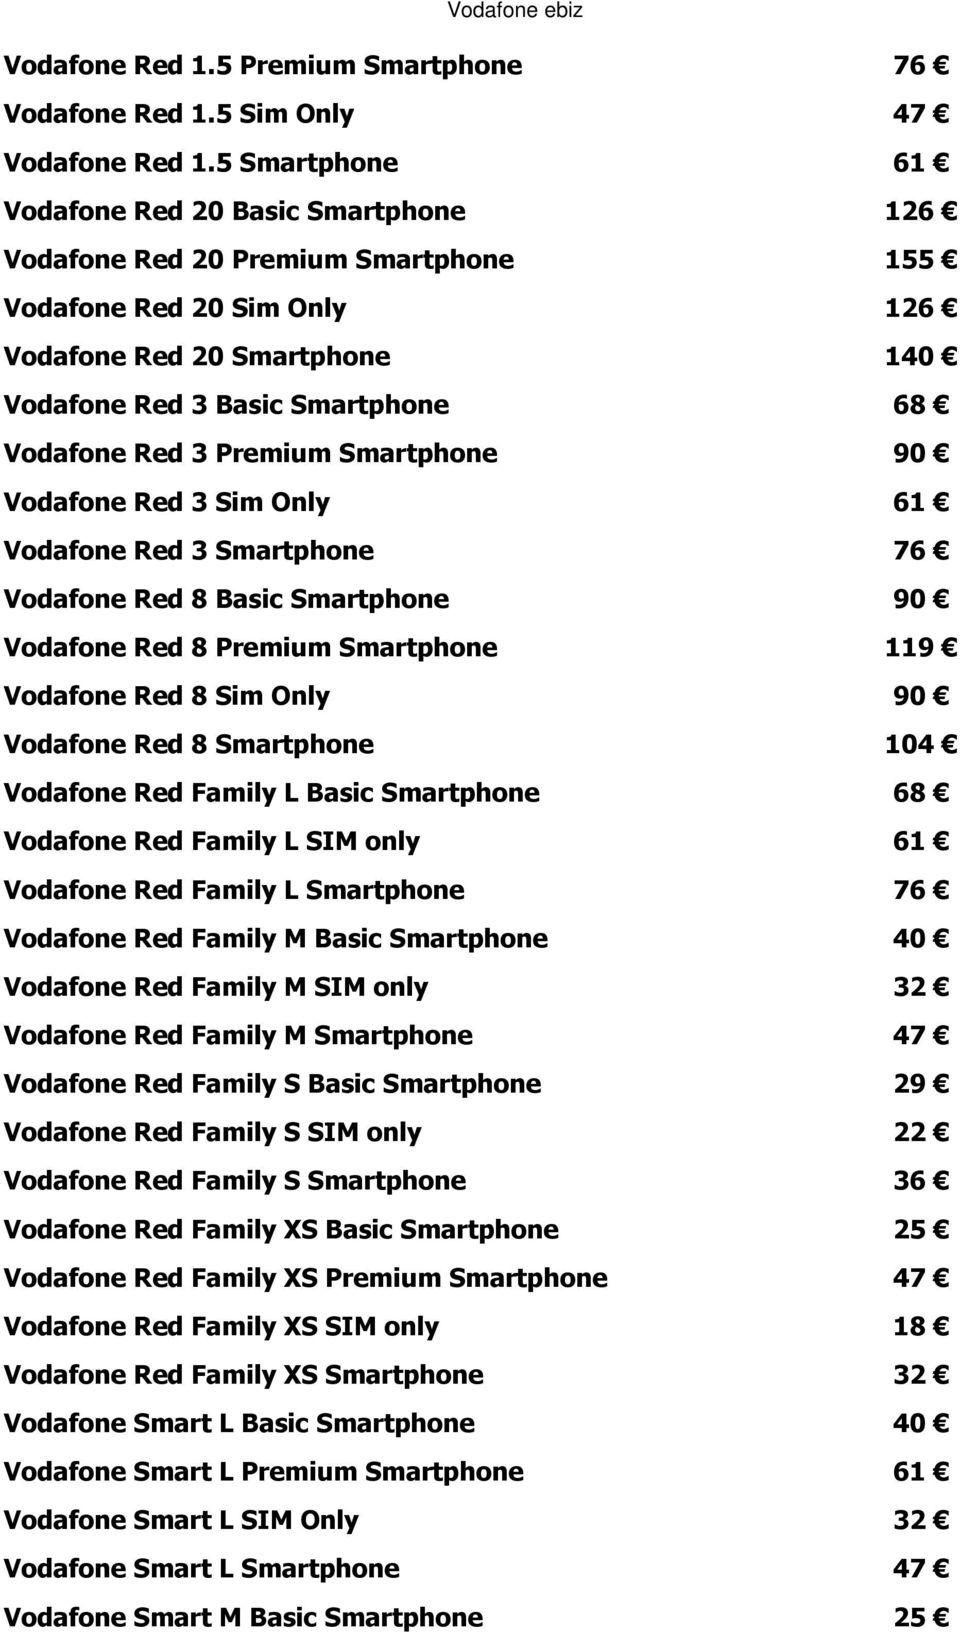 3 Premium Smartphone 90 Vodafone Red 3 Sim Only 61 Vodafone Red 3 Smartphone 76 Vodafone Red 8 Basic Smartphone 90 Vodafone Red 8 Premium Smartphone 119 Vodafone Red 8 Sim Only 90 Vodafone Red 8